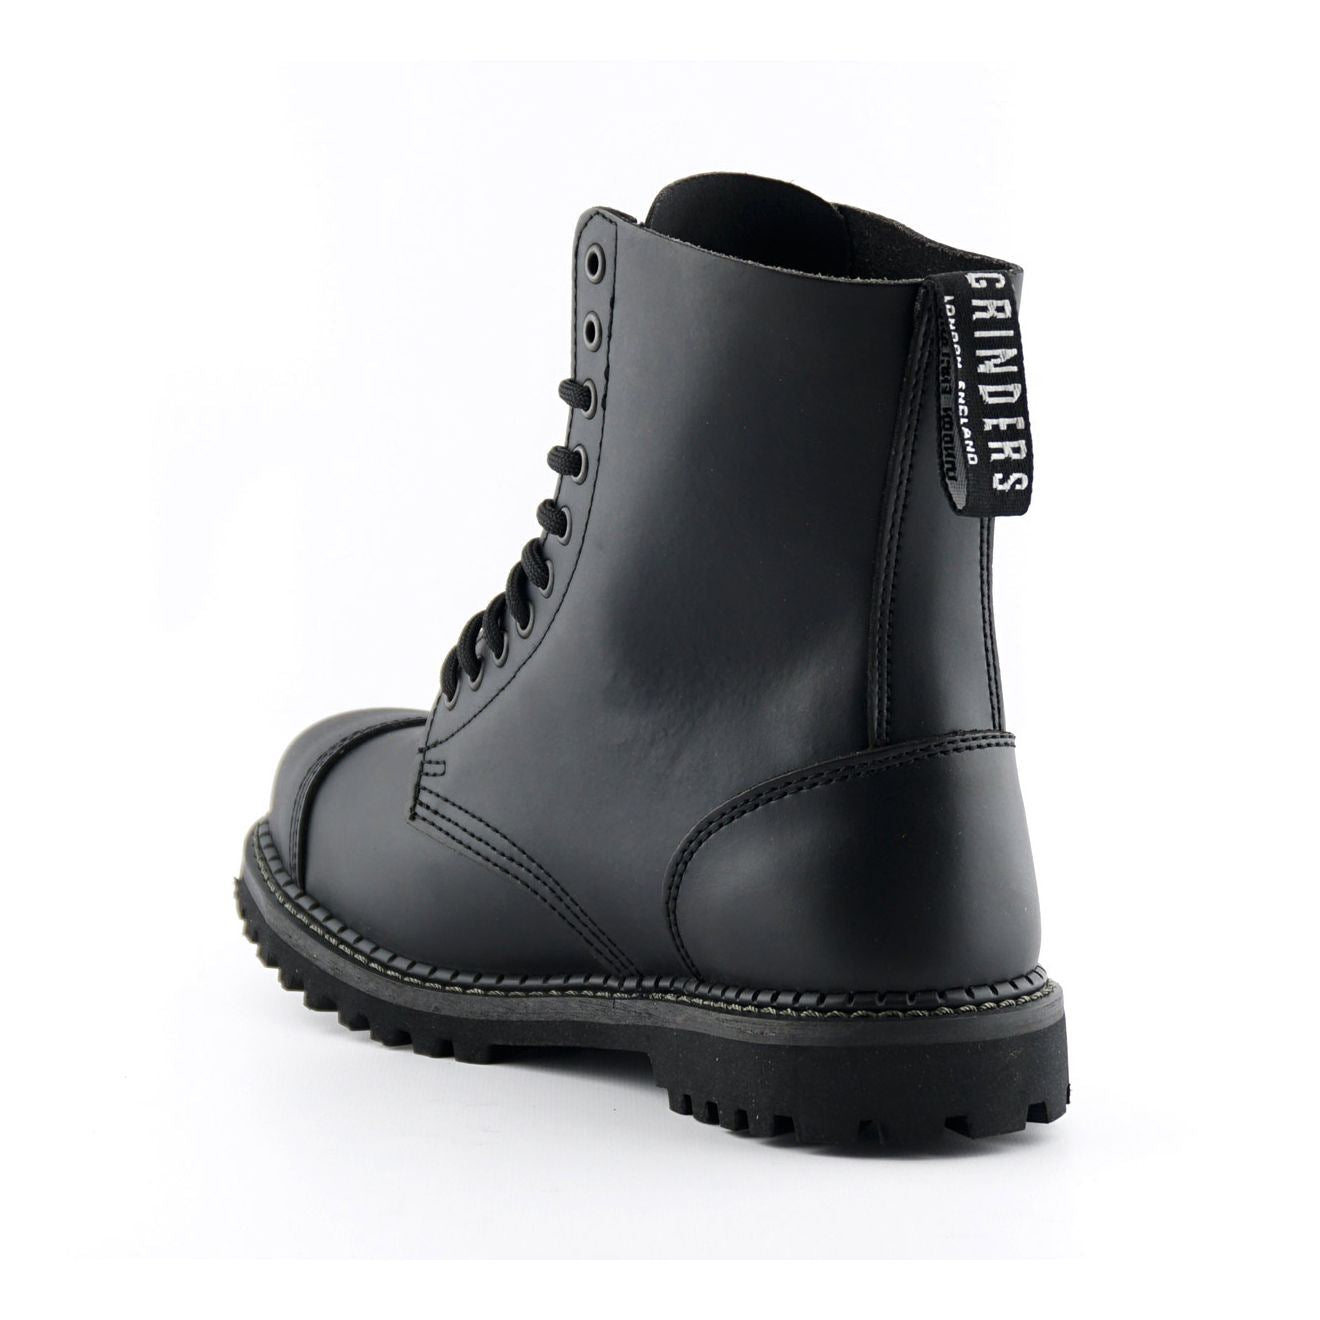 Grinders Stag CS Black Unisex Safety Steel Toe Cap Military Punk Boots - Upperclass Fashions 